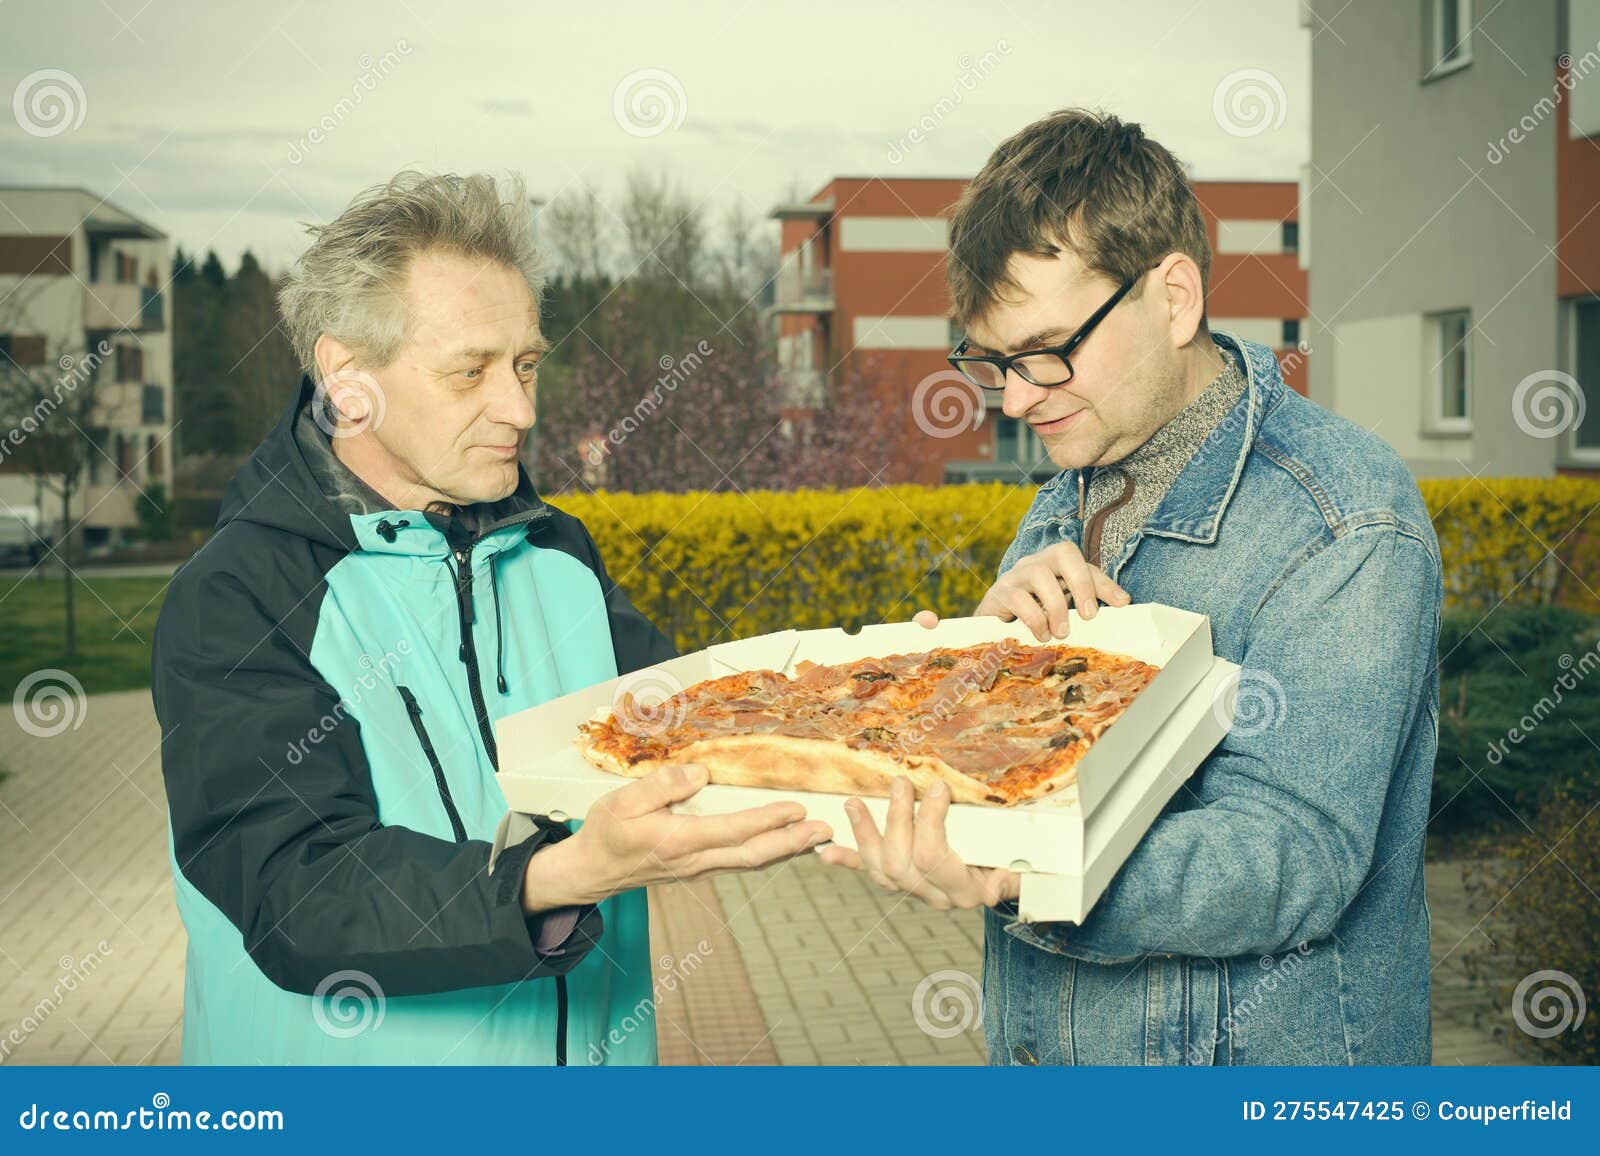 customer assuming a pizza food from a delivery man on sidewalk